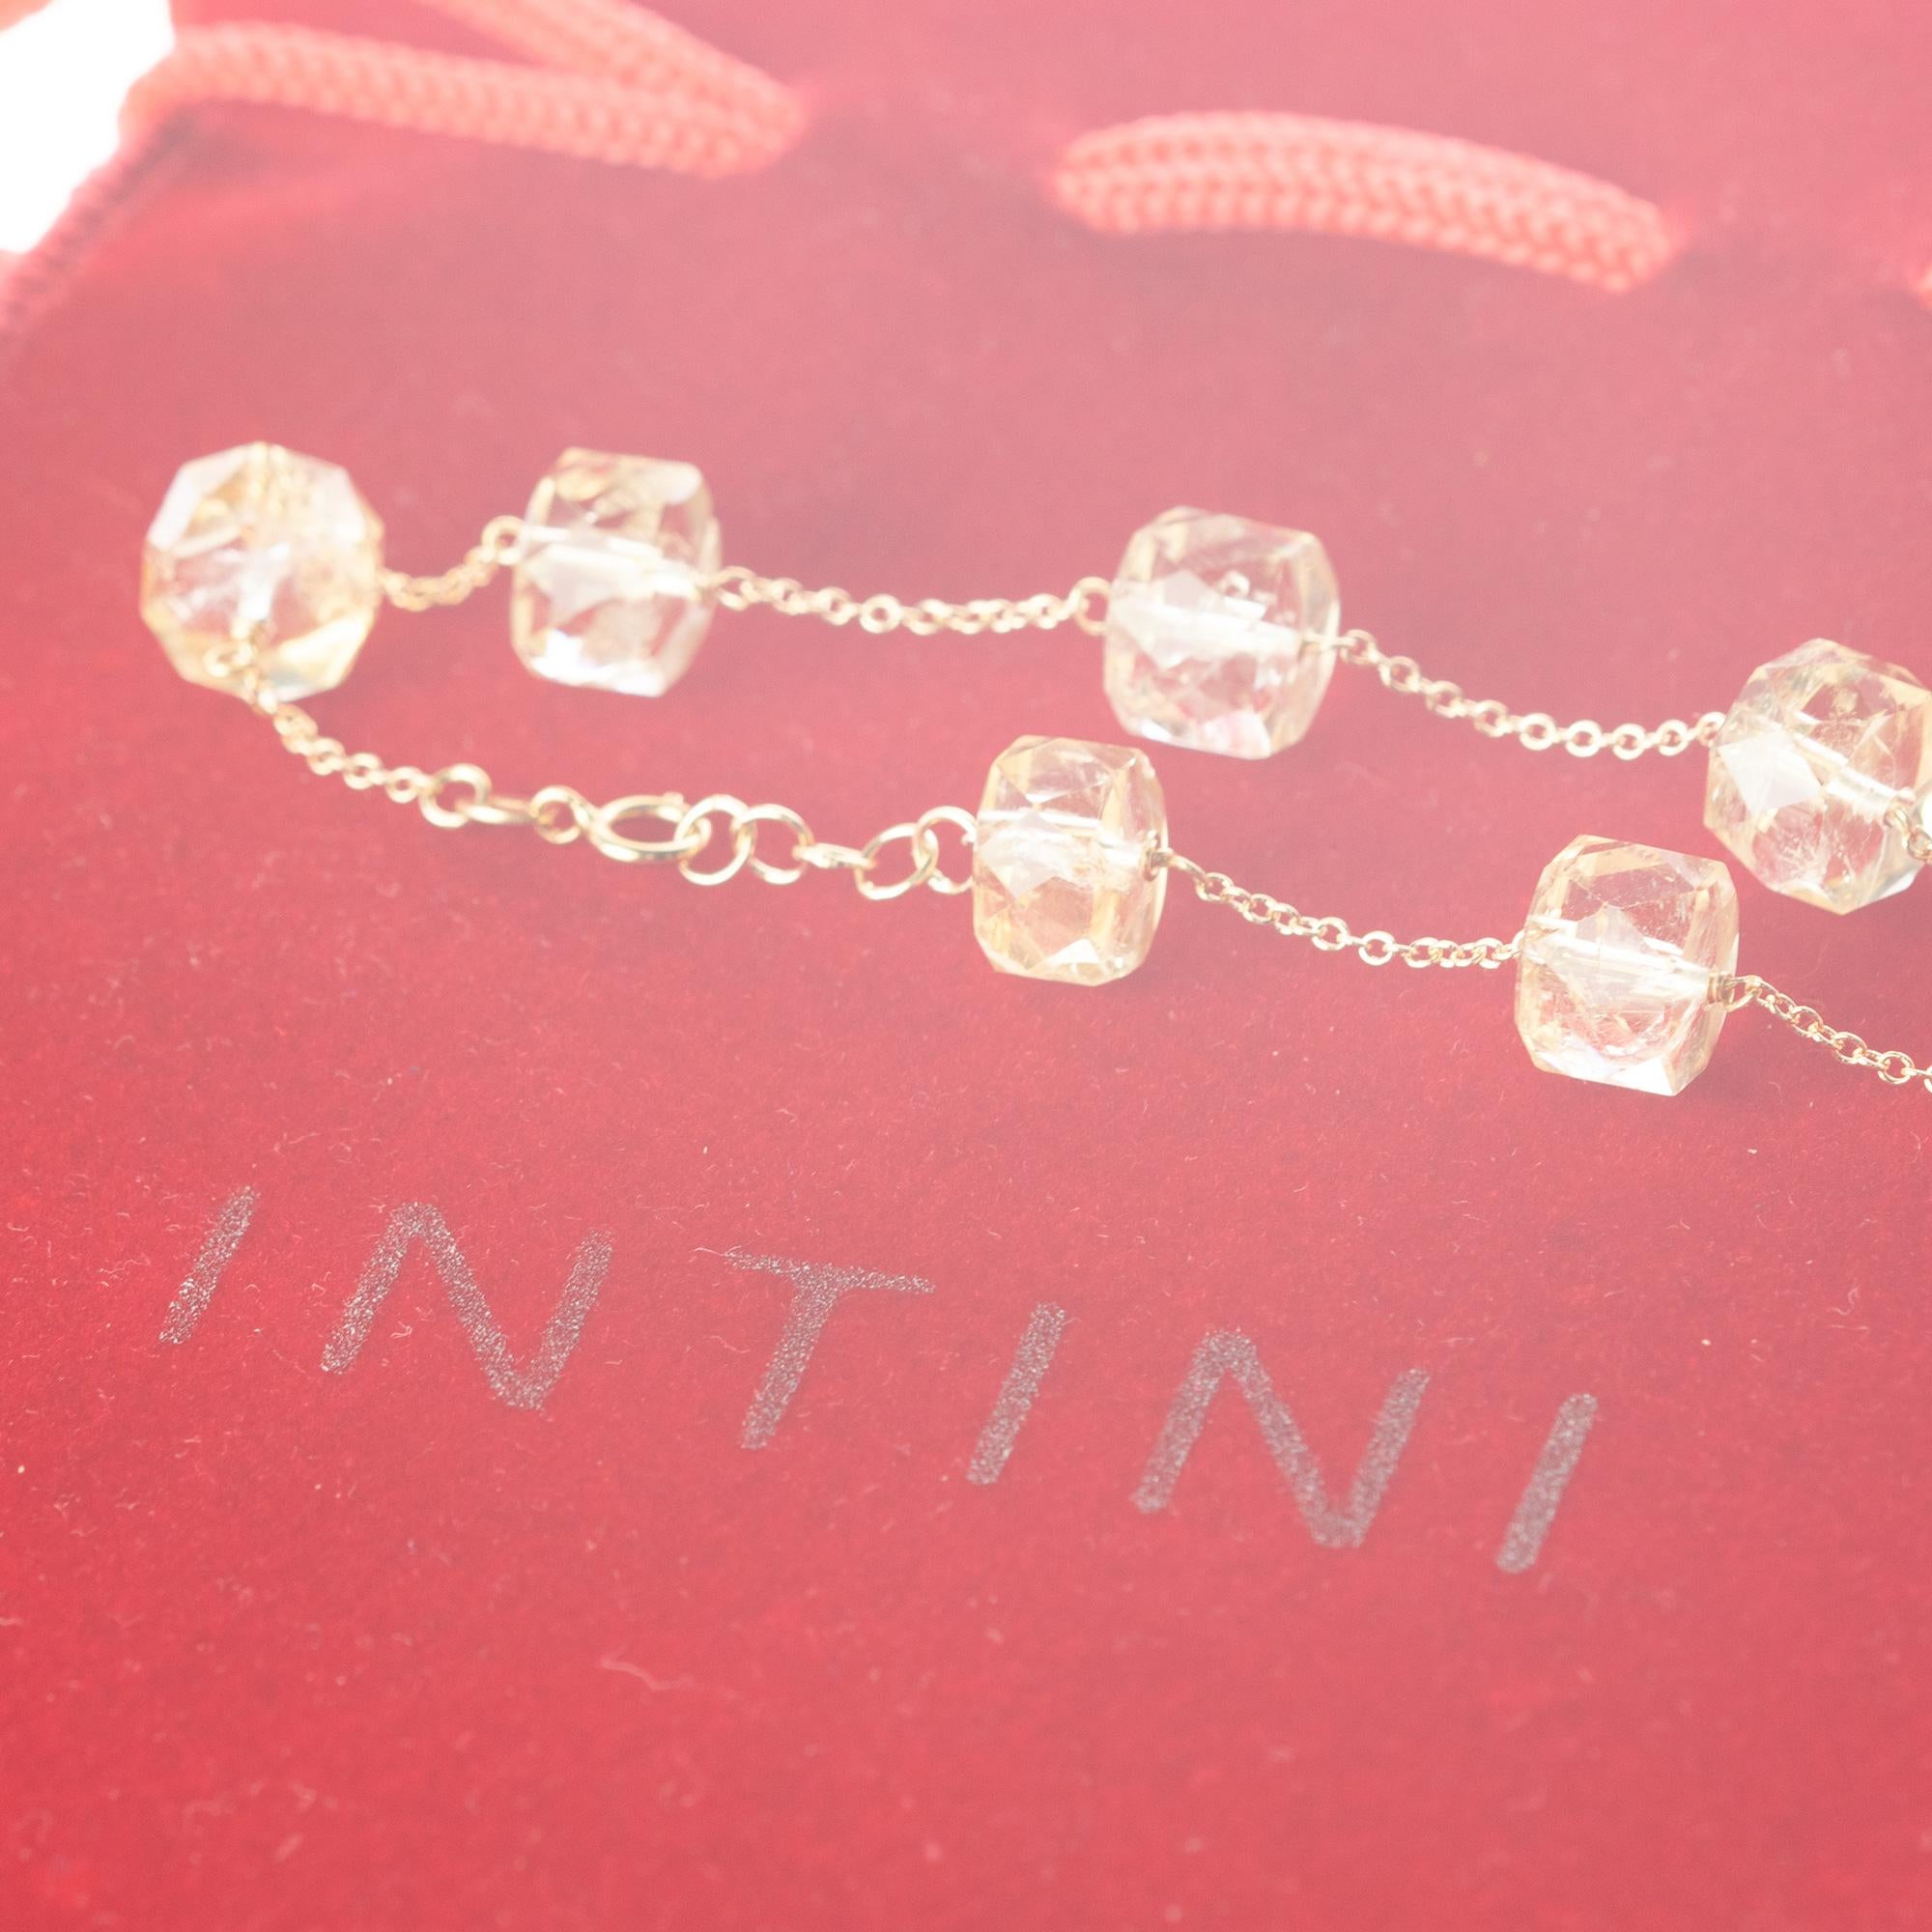 Intini Jewels signature quality on a modern and contemporary design jewel.

Six gems of top quality pure citrine quartz embellish a delicate 18 karat yellow gold chain bracelet.

An elegant touch of glamour at your fingertips. Let yourself be